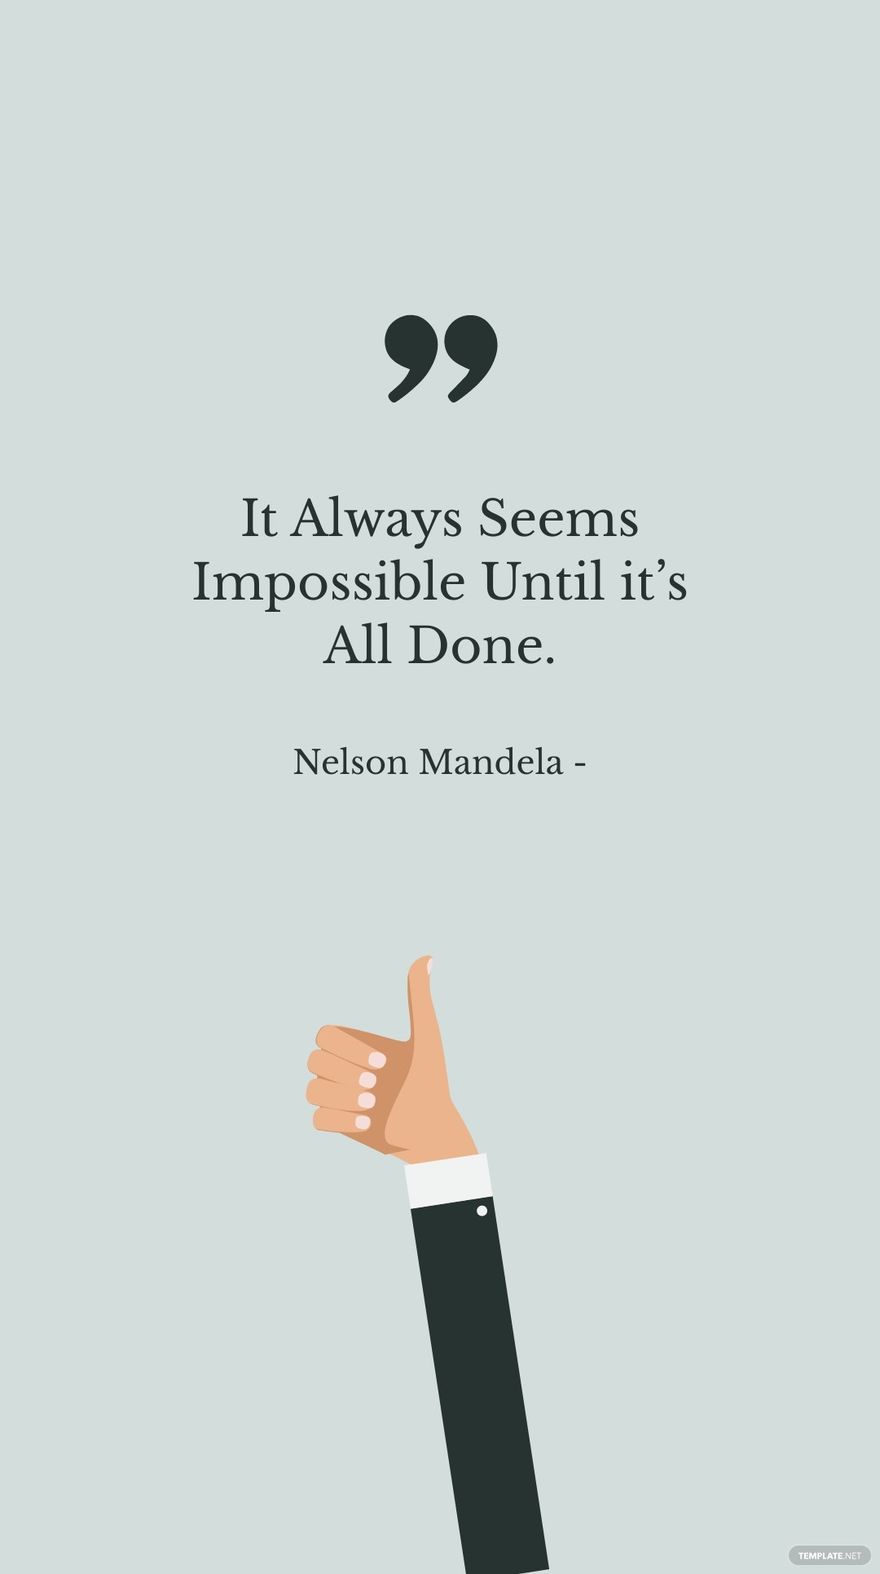 Nelson Mandela - It Always Seems Impossible Until it’s All Done.